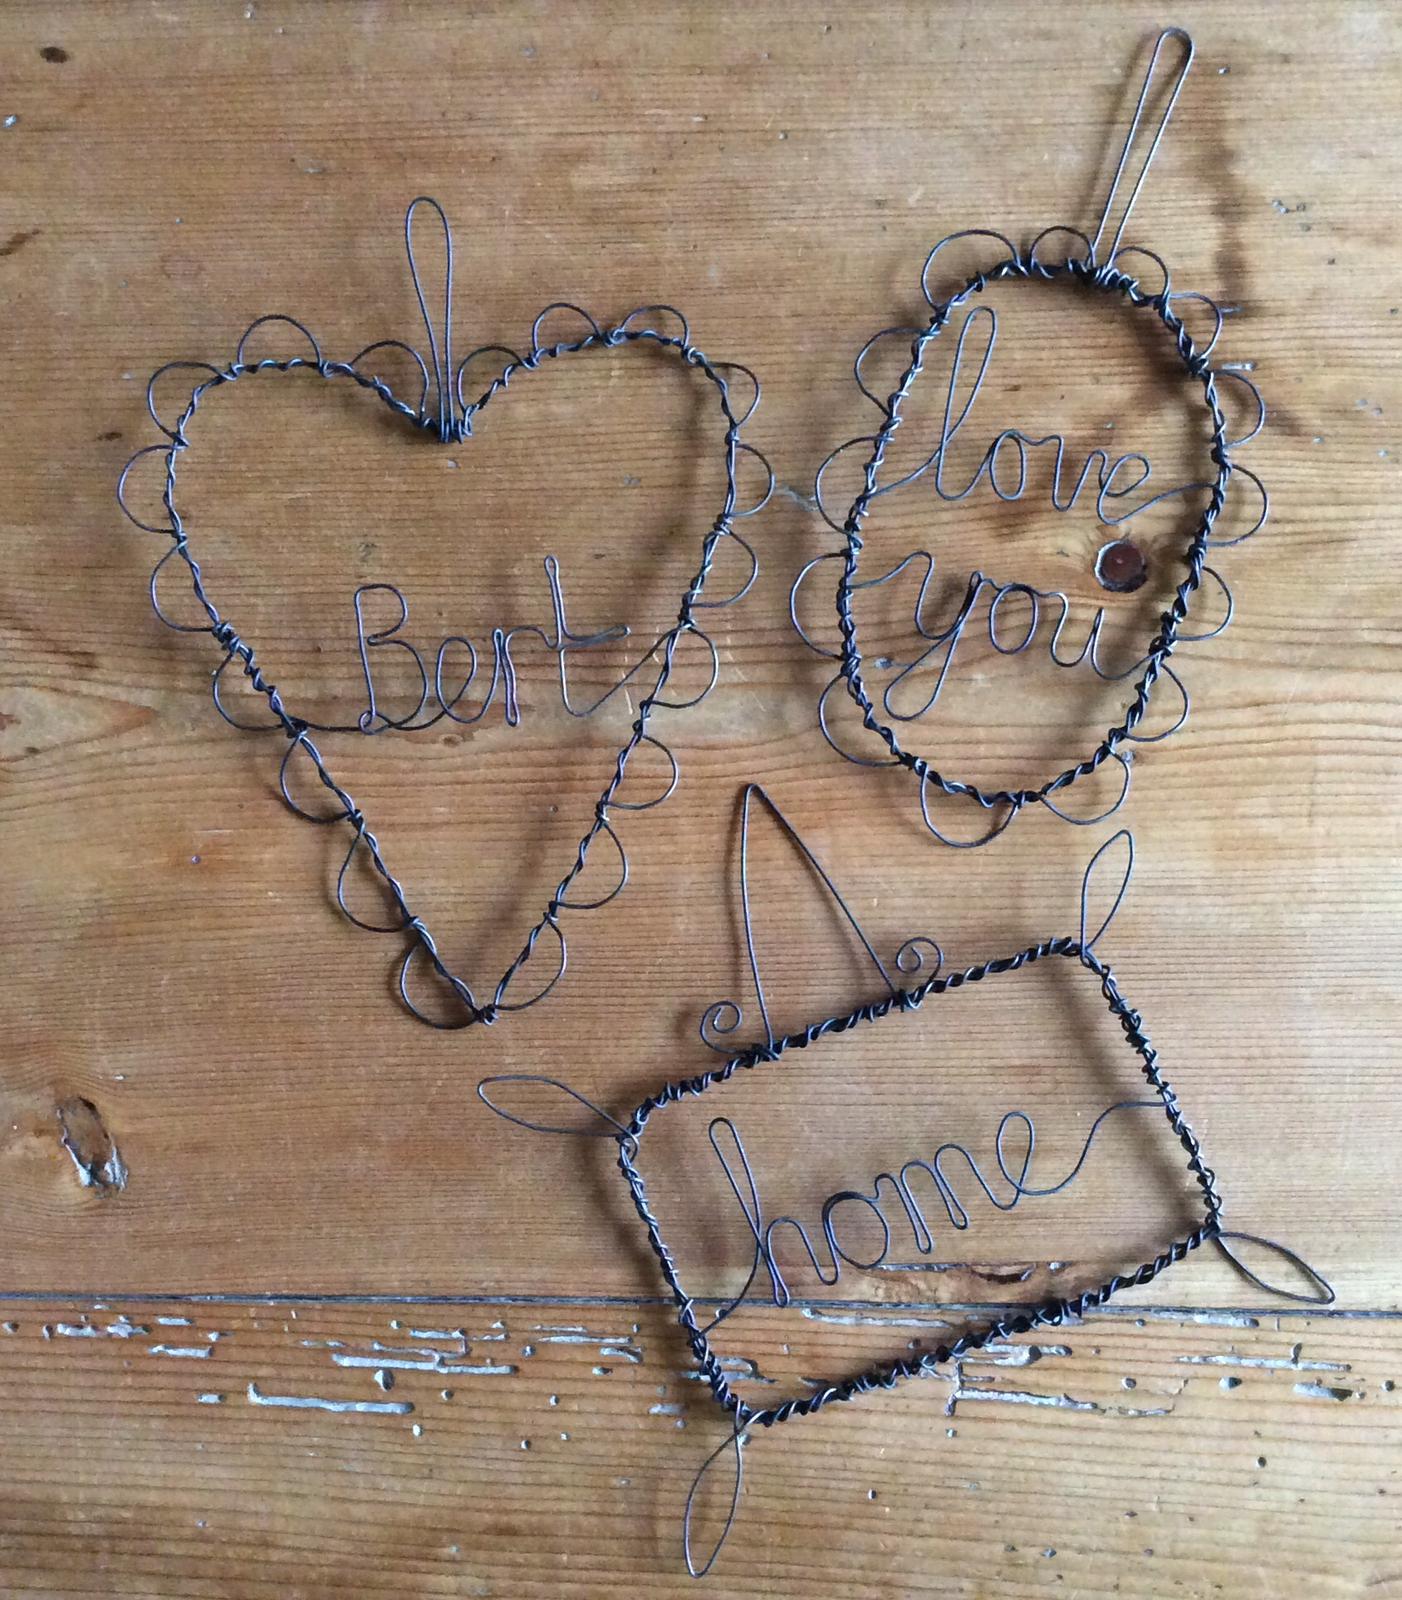 Wire Sculpture (Art in the Barn)